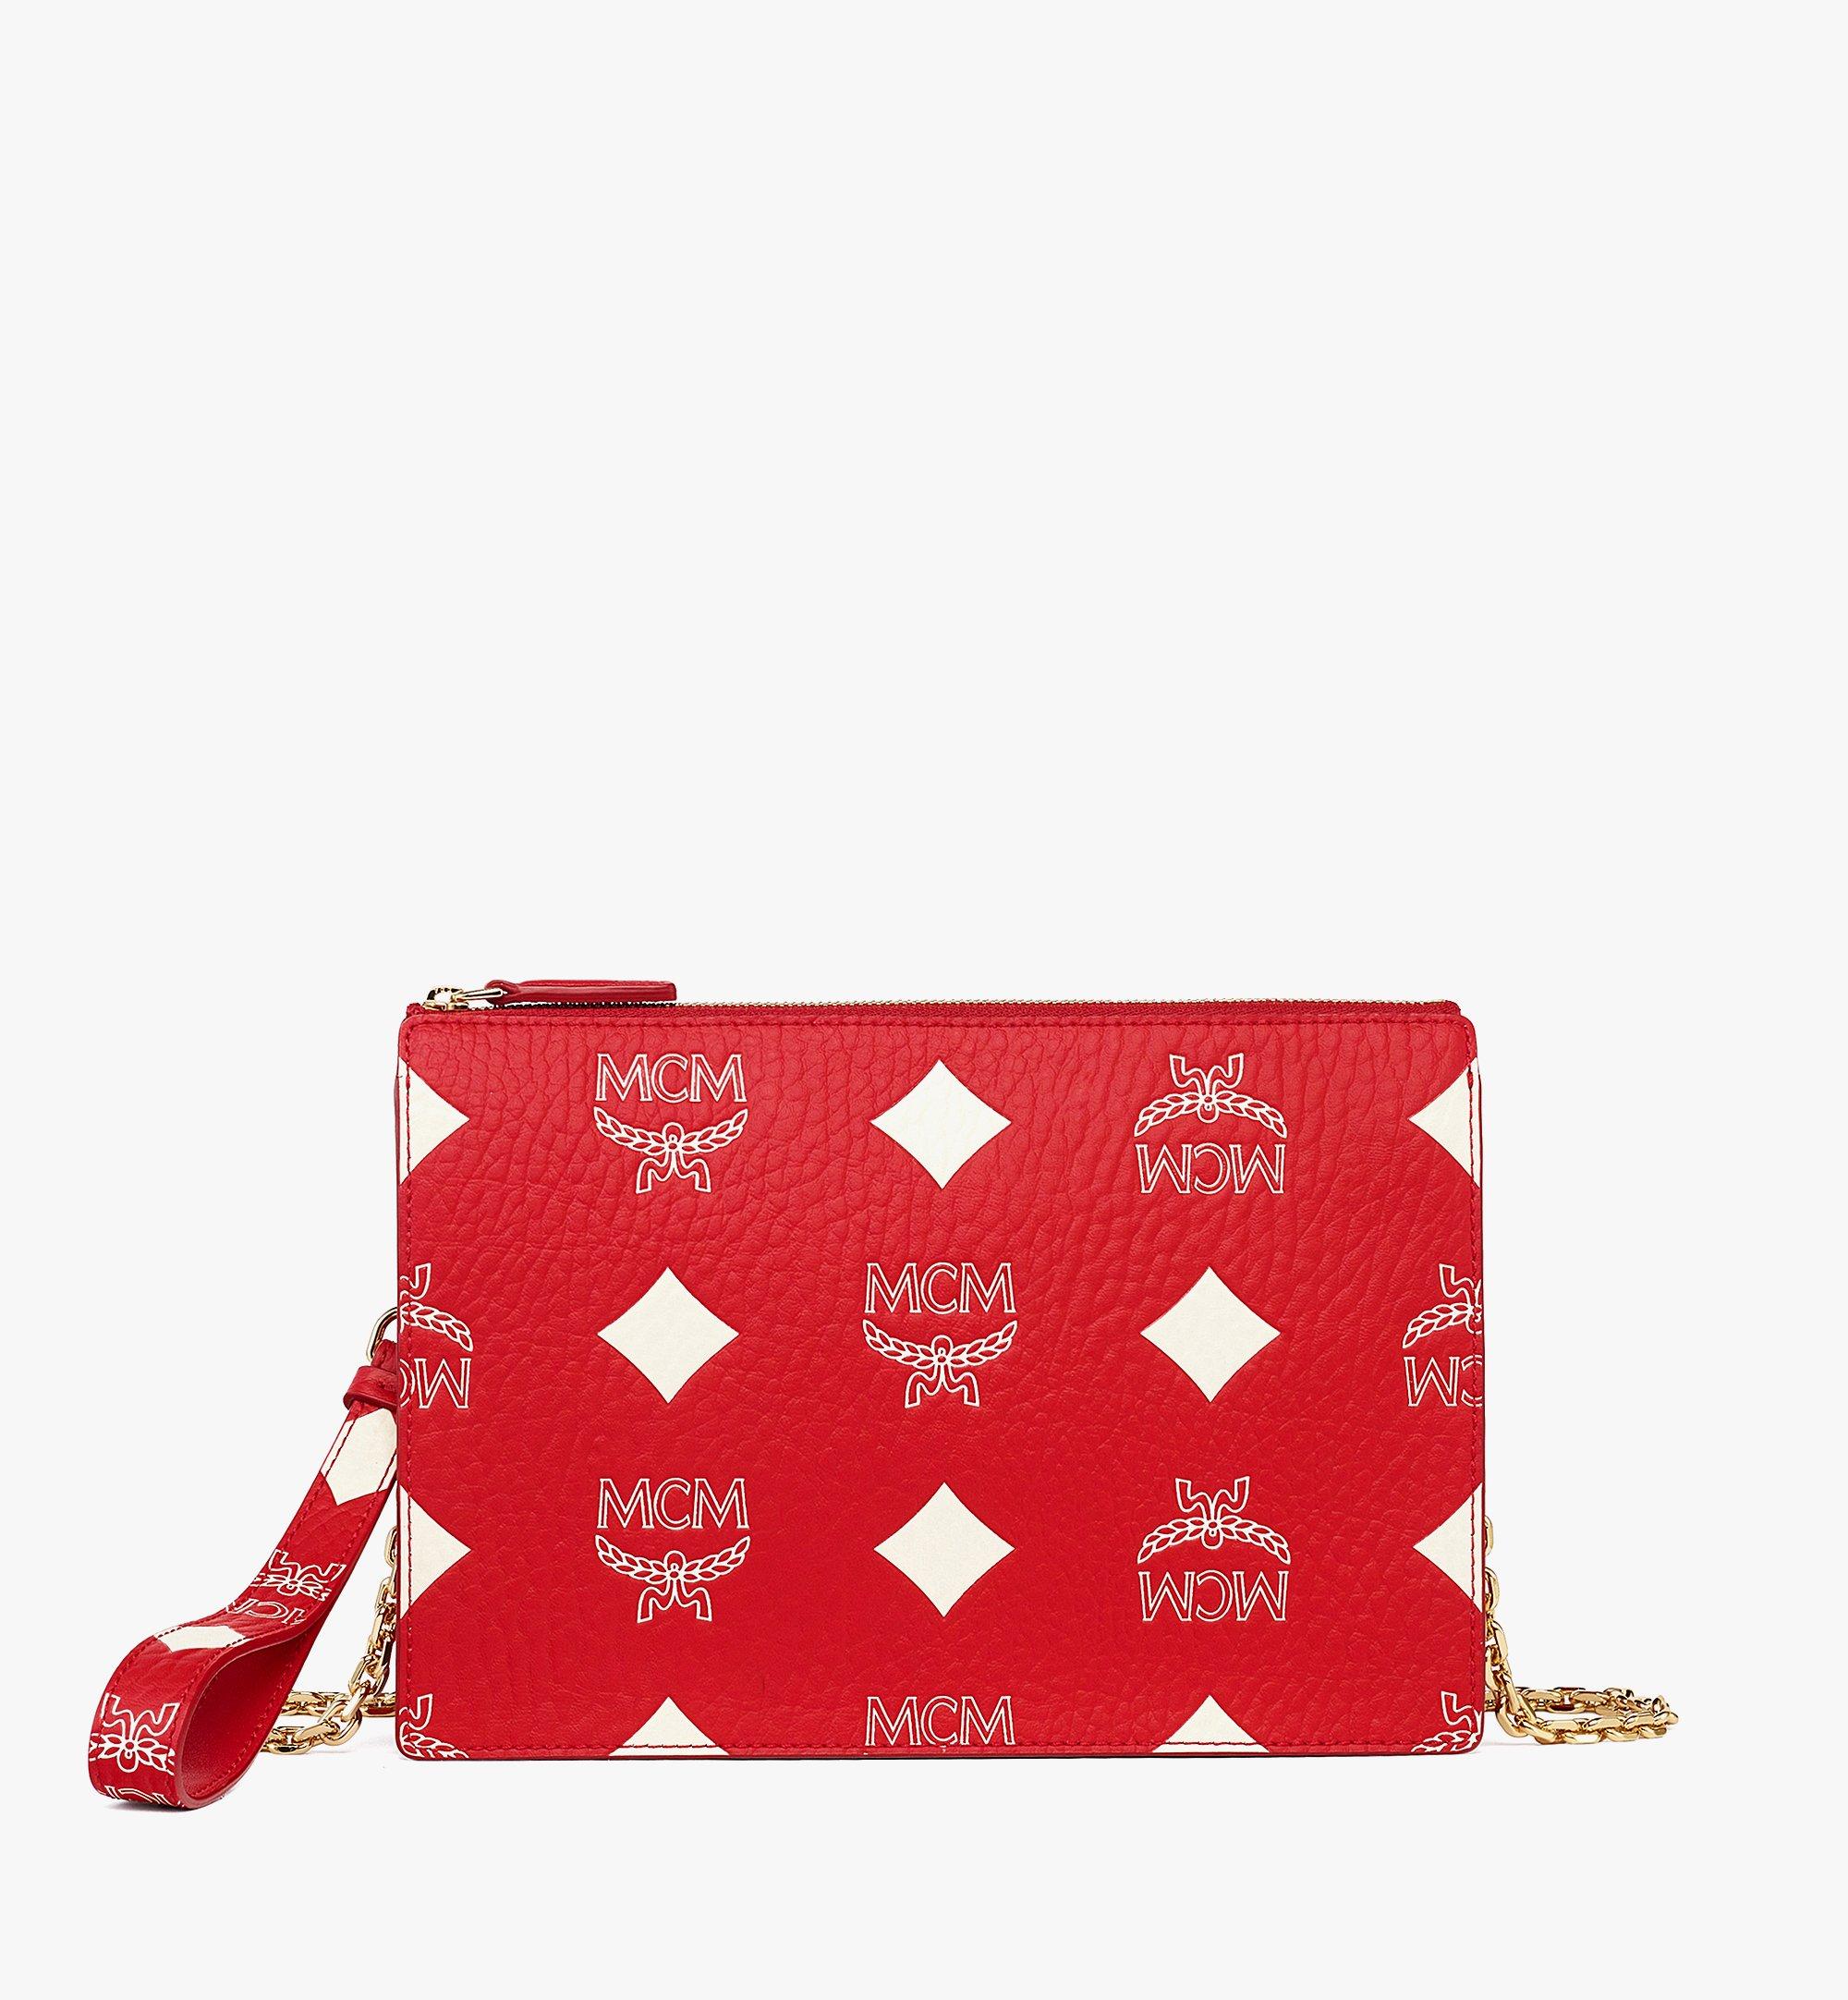 Small Wristlet Zip Pouch w/ Chain Strap in Maxi Visetos Red | MCM ®US